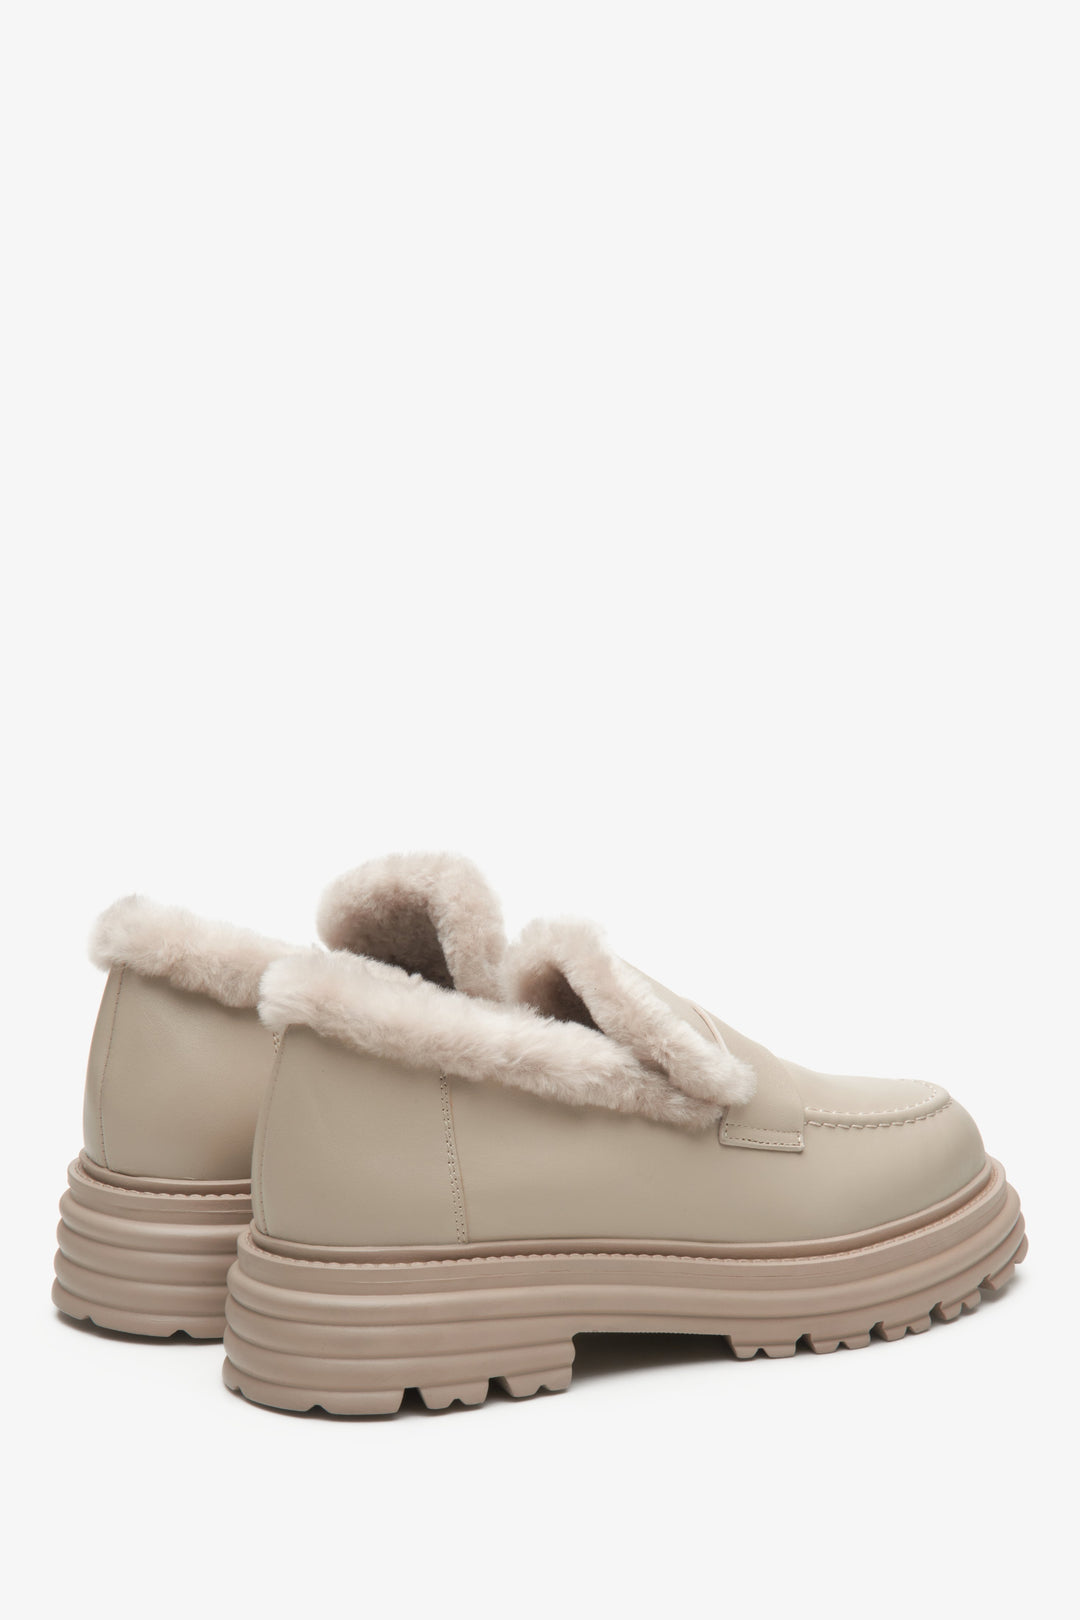 Women's leather moccasins by Estro in beige with insulation - close-up on the heel and side line of the shoes.